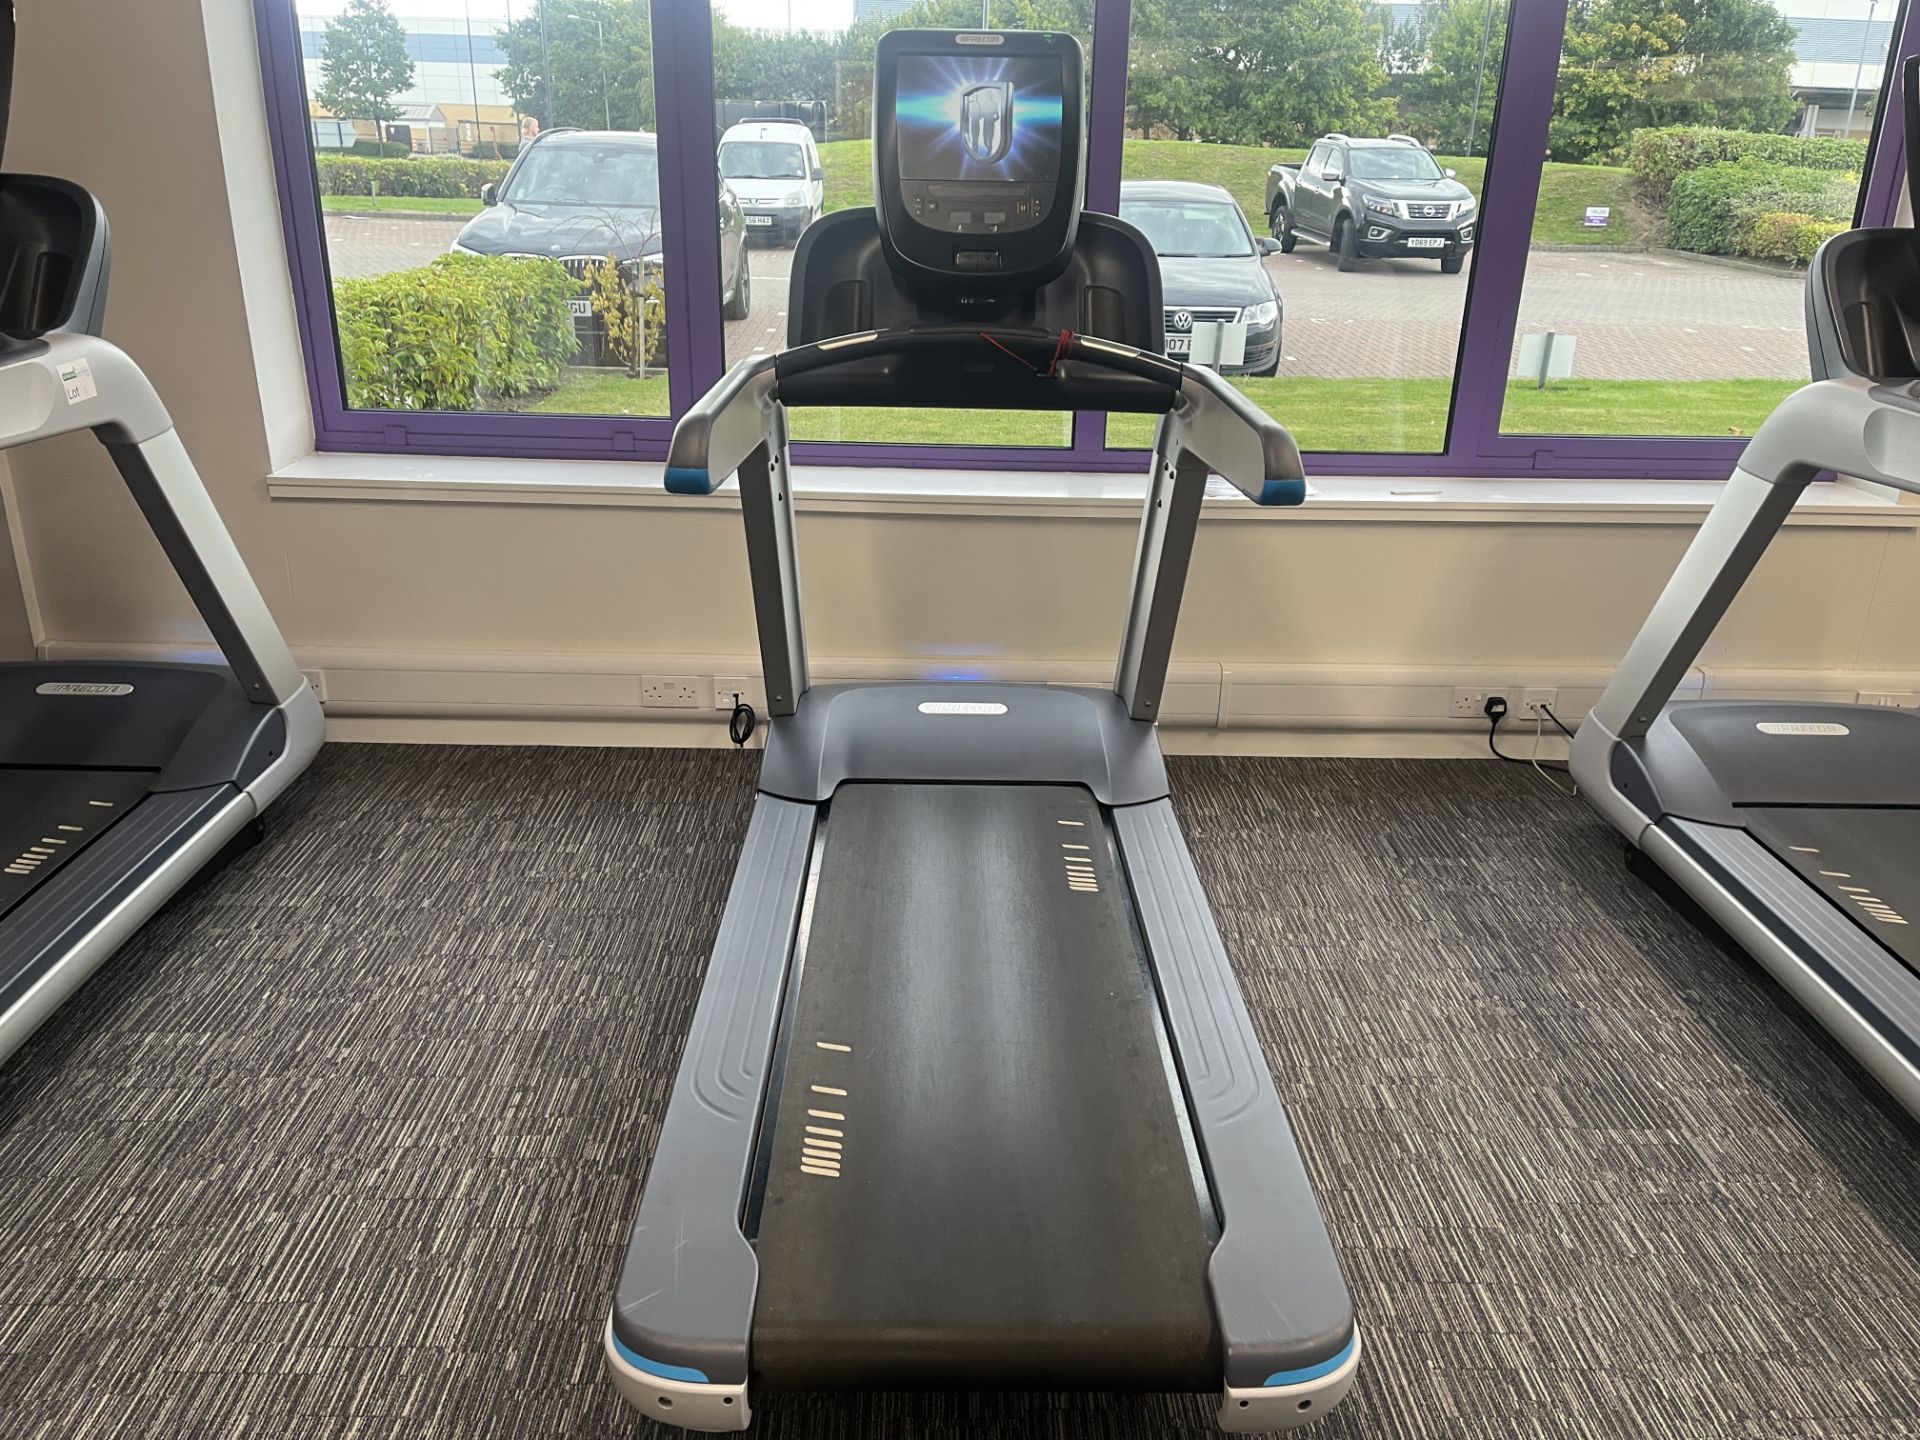 PRECOR TRM885 TREADMILL WITH P82 CONSOLE DISPLAY - Image 2 of 2